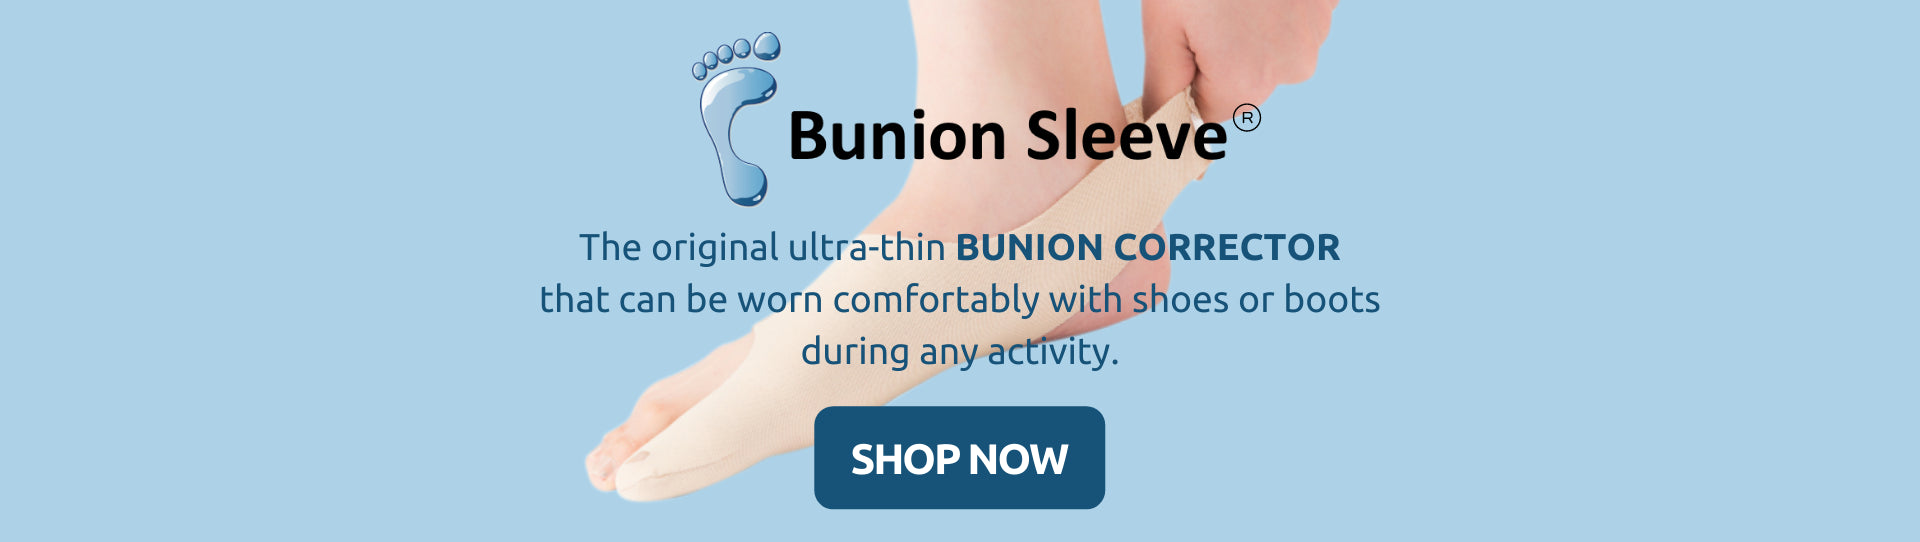 bunion corrector you can wear with shoes